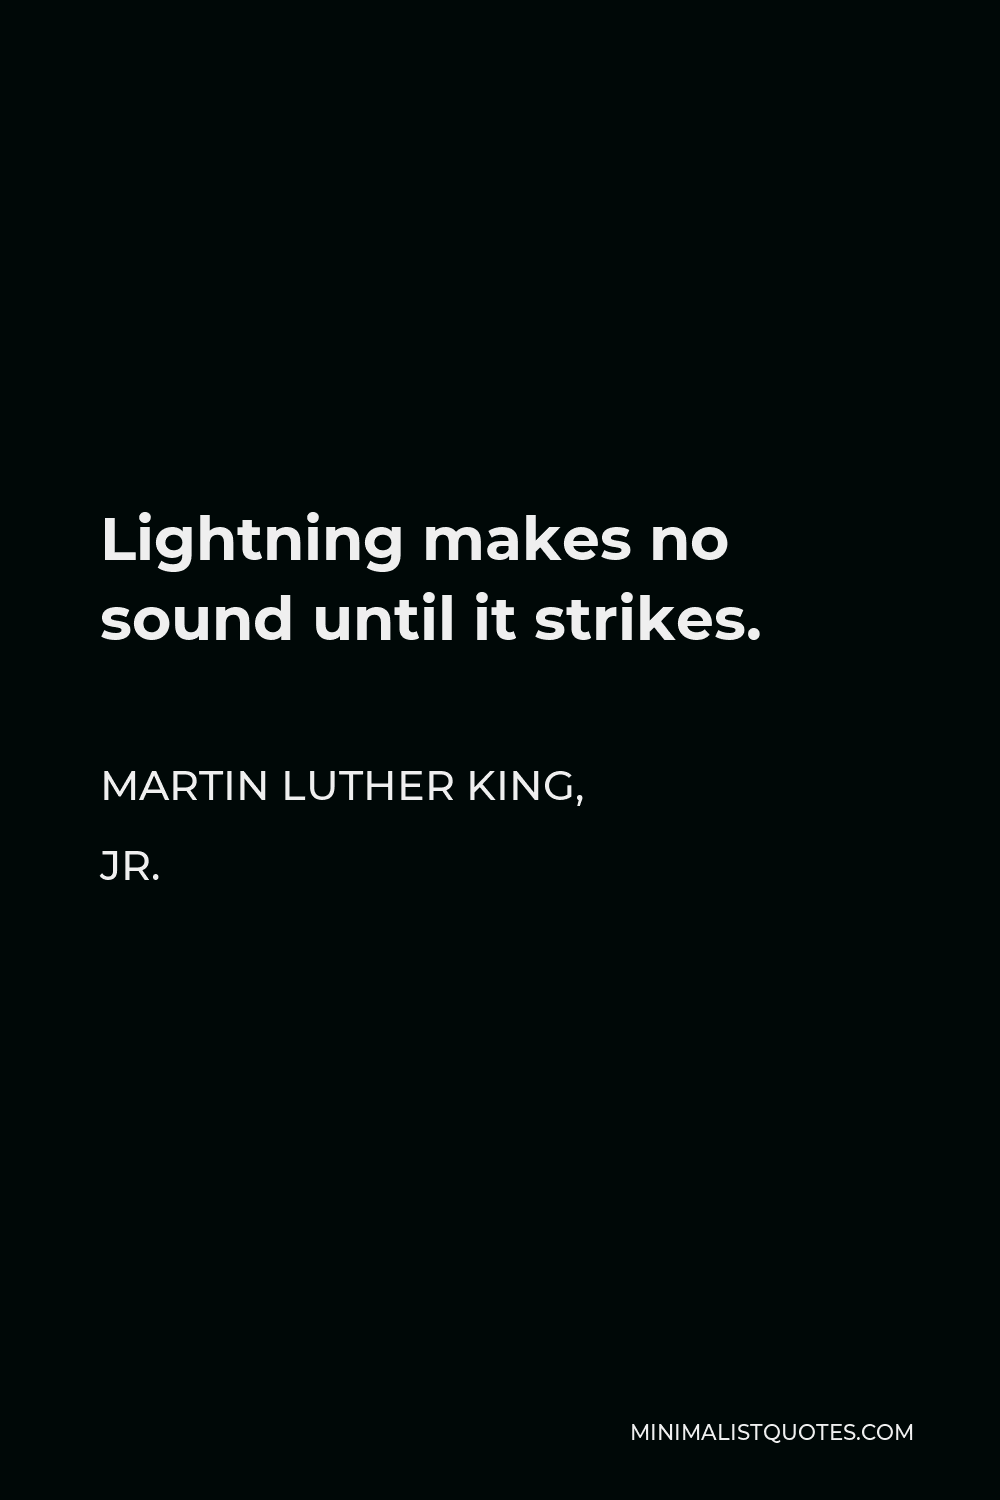 Martin Luther King, Jr. Quote - Lightning makes no sound until it strikes.